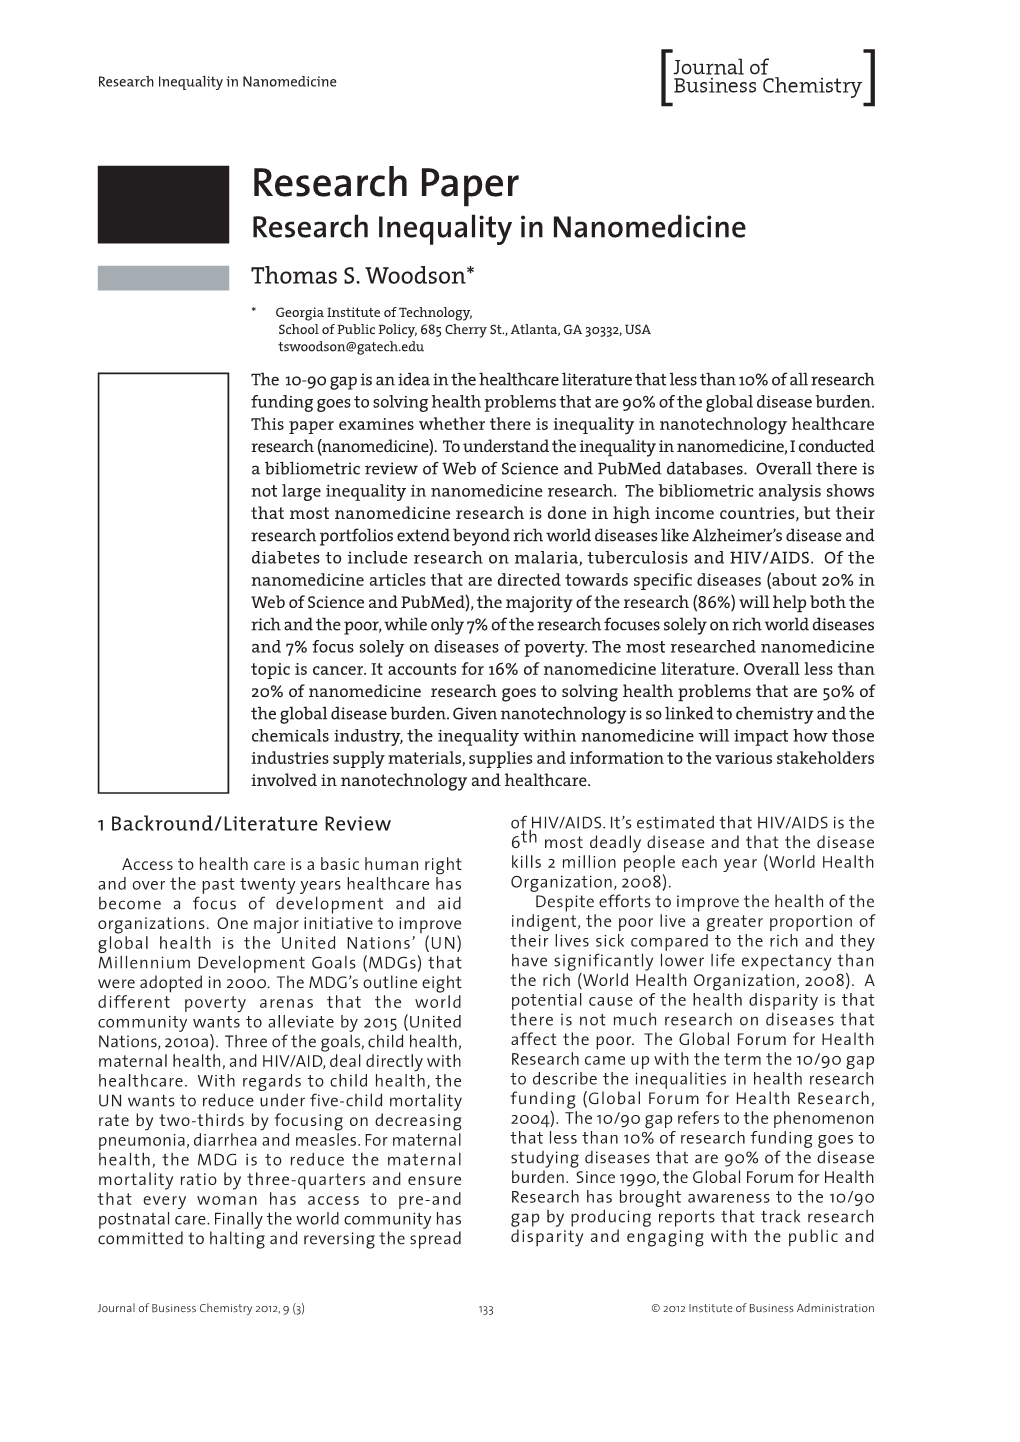 Research Paper Research Inequality in Nanomedicine Thomas S